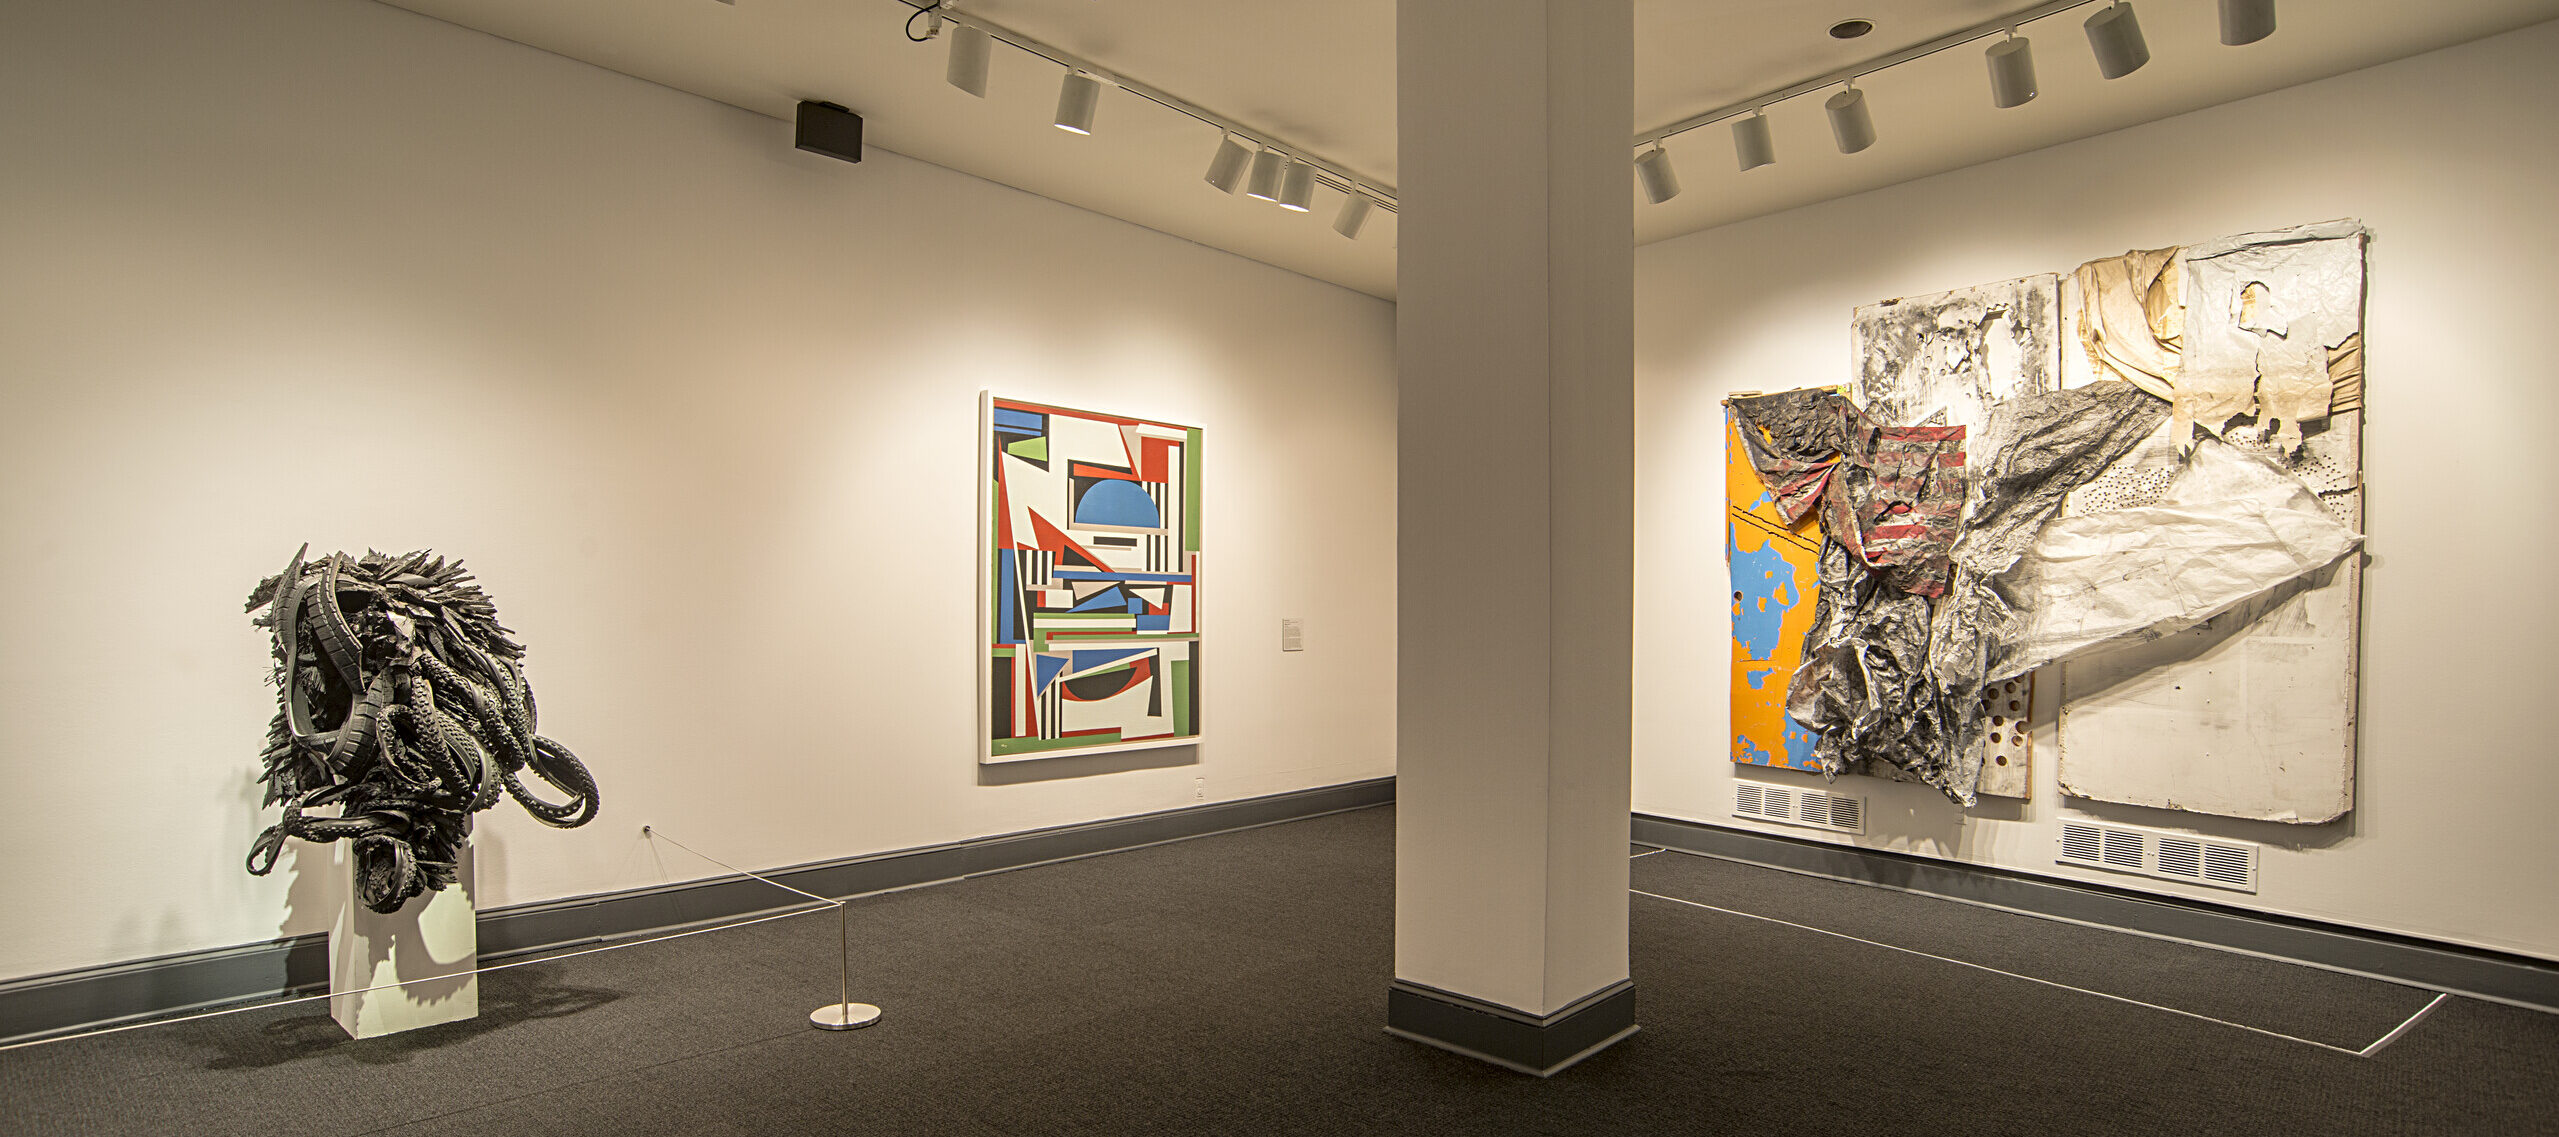 An installation shot of a gallery shows several art pieces in the room. On the left, there is a sculpture made from black rubber tires sits on a. The black rubber tires are shaped and distorted in way that they create an organic form, resembling an insect or an alien-like figure.